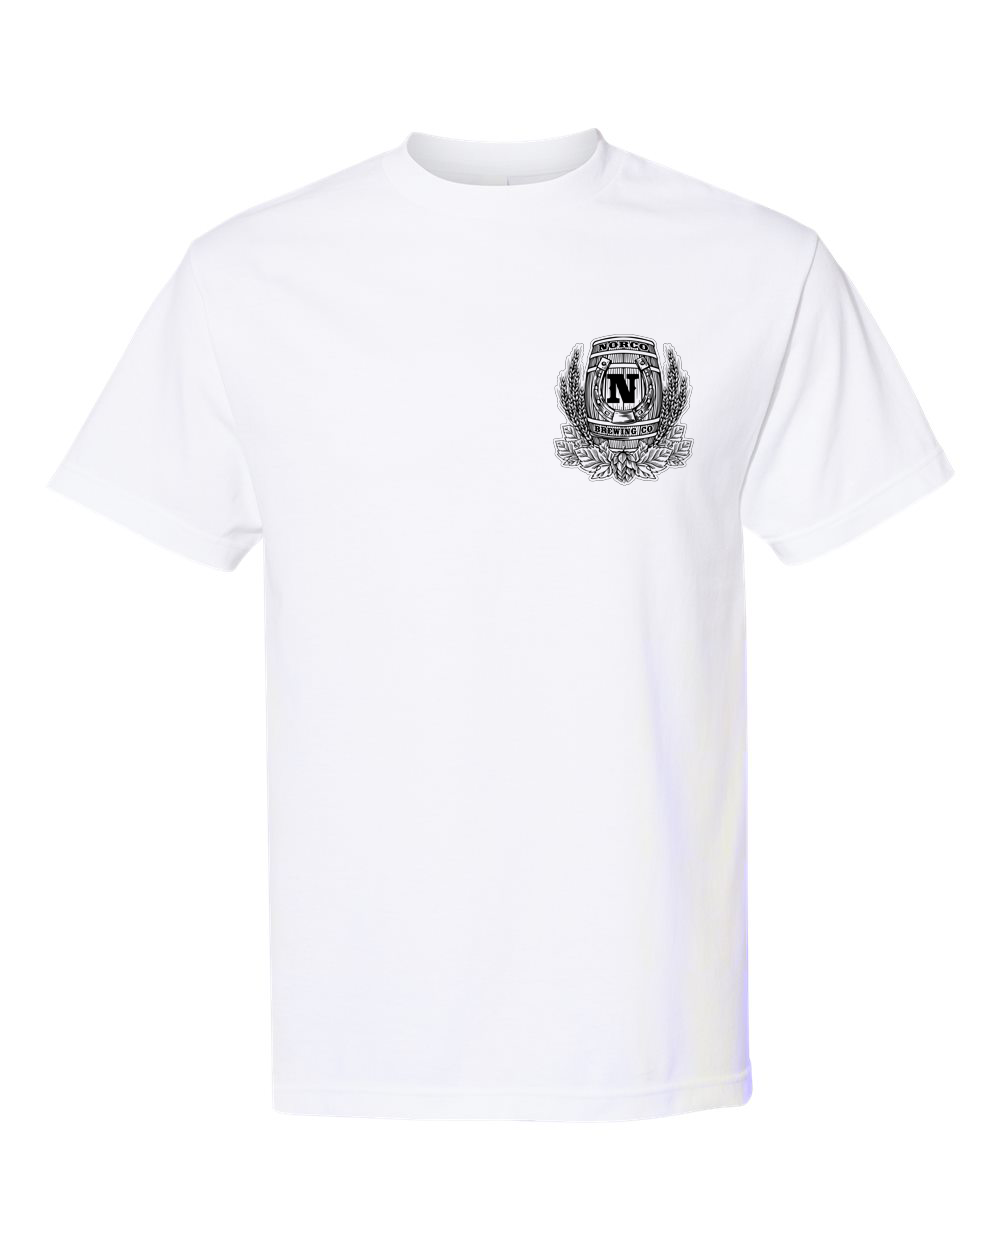 Norco Brewing Tee - SS White